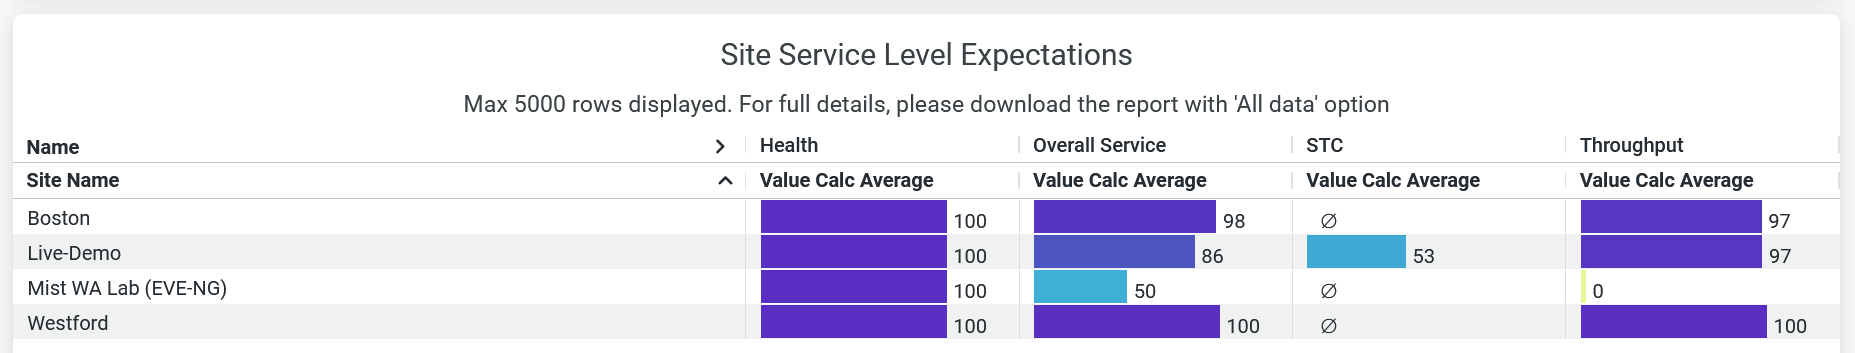 Site Service Level Expectations